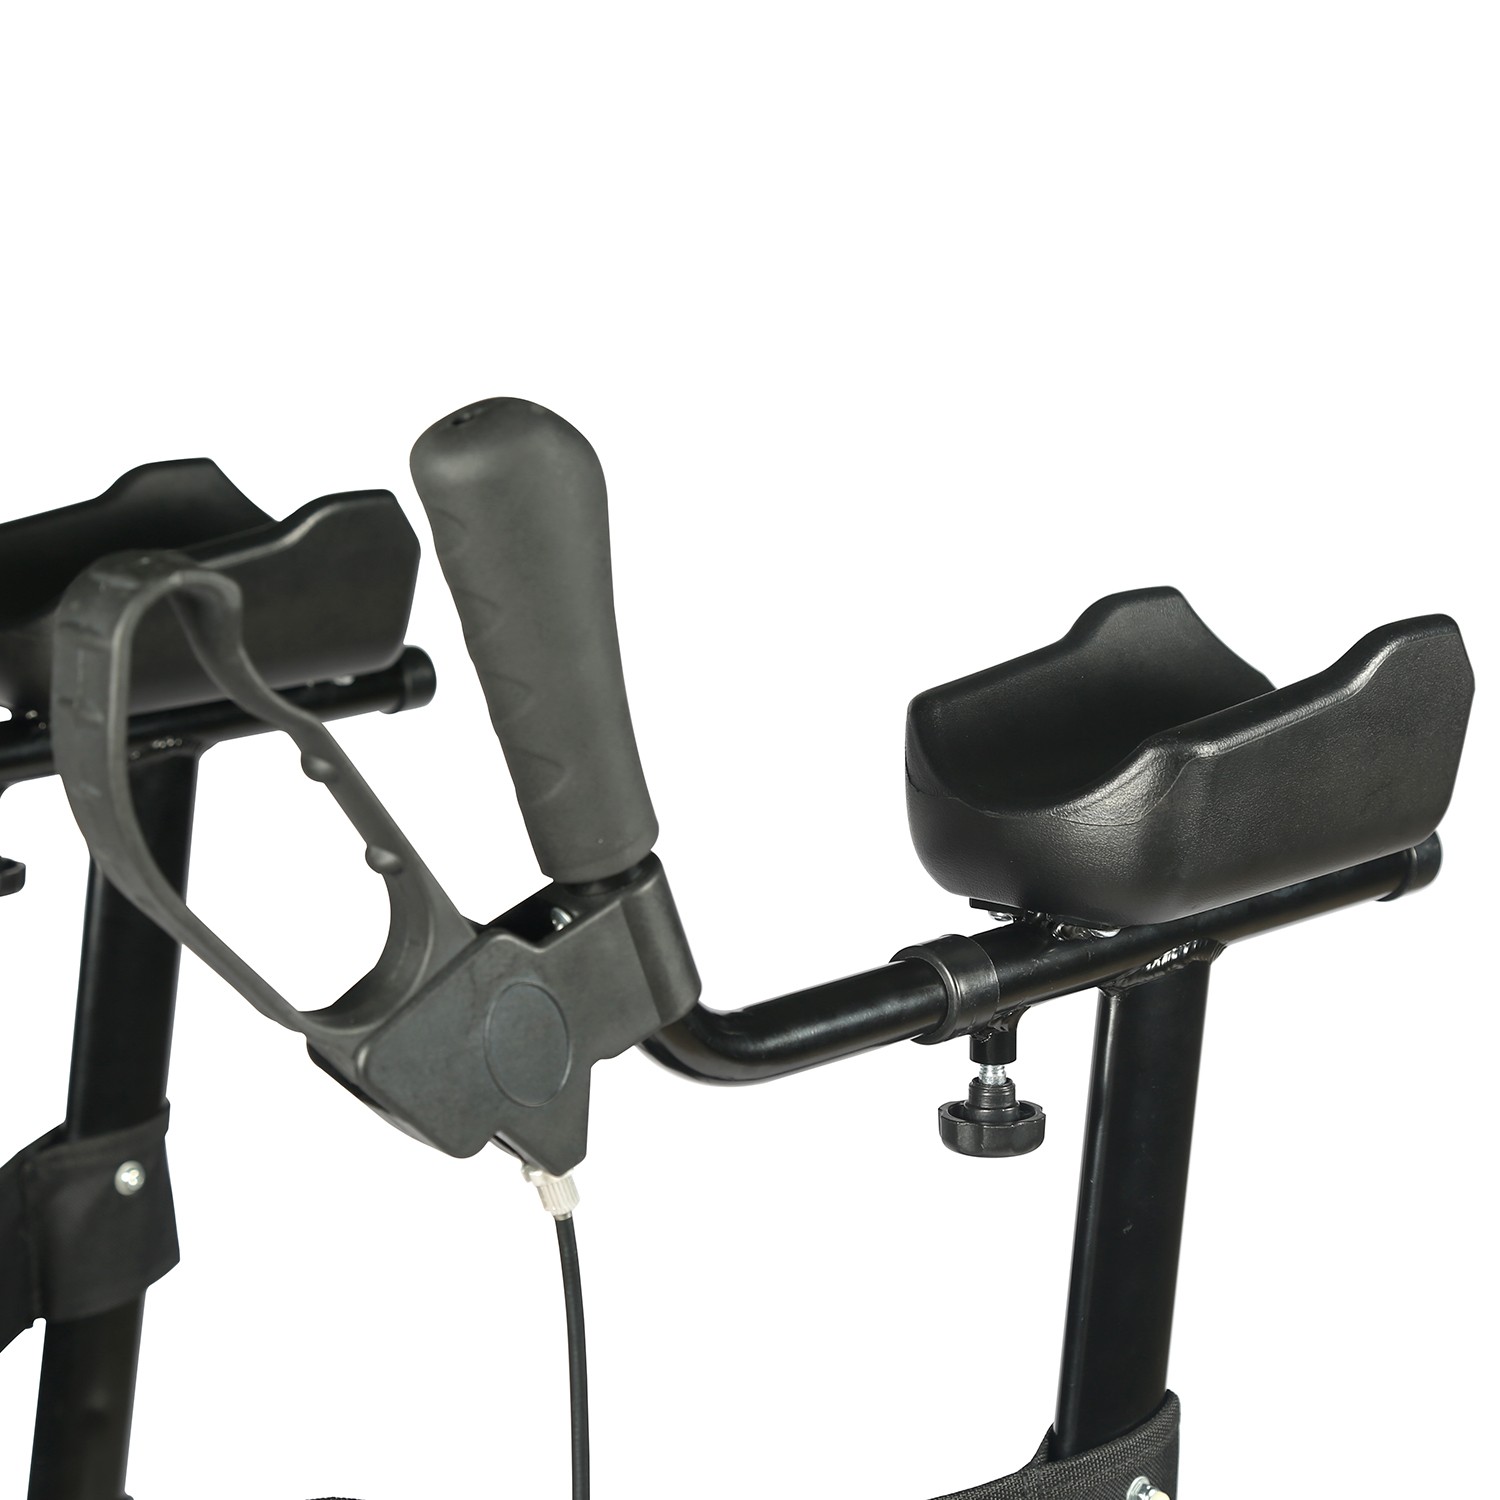 New Product Aluminum Upright Walker Rollator Auxiliary Walking Equipment with Arm Support